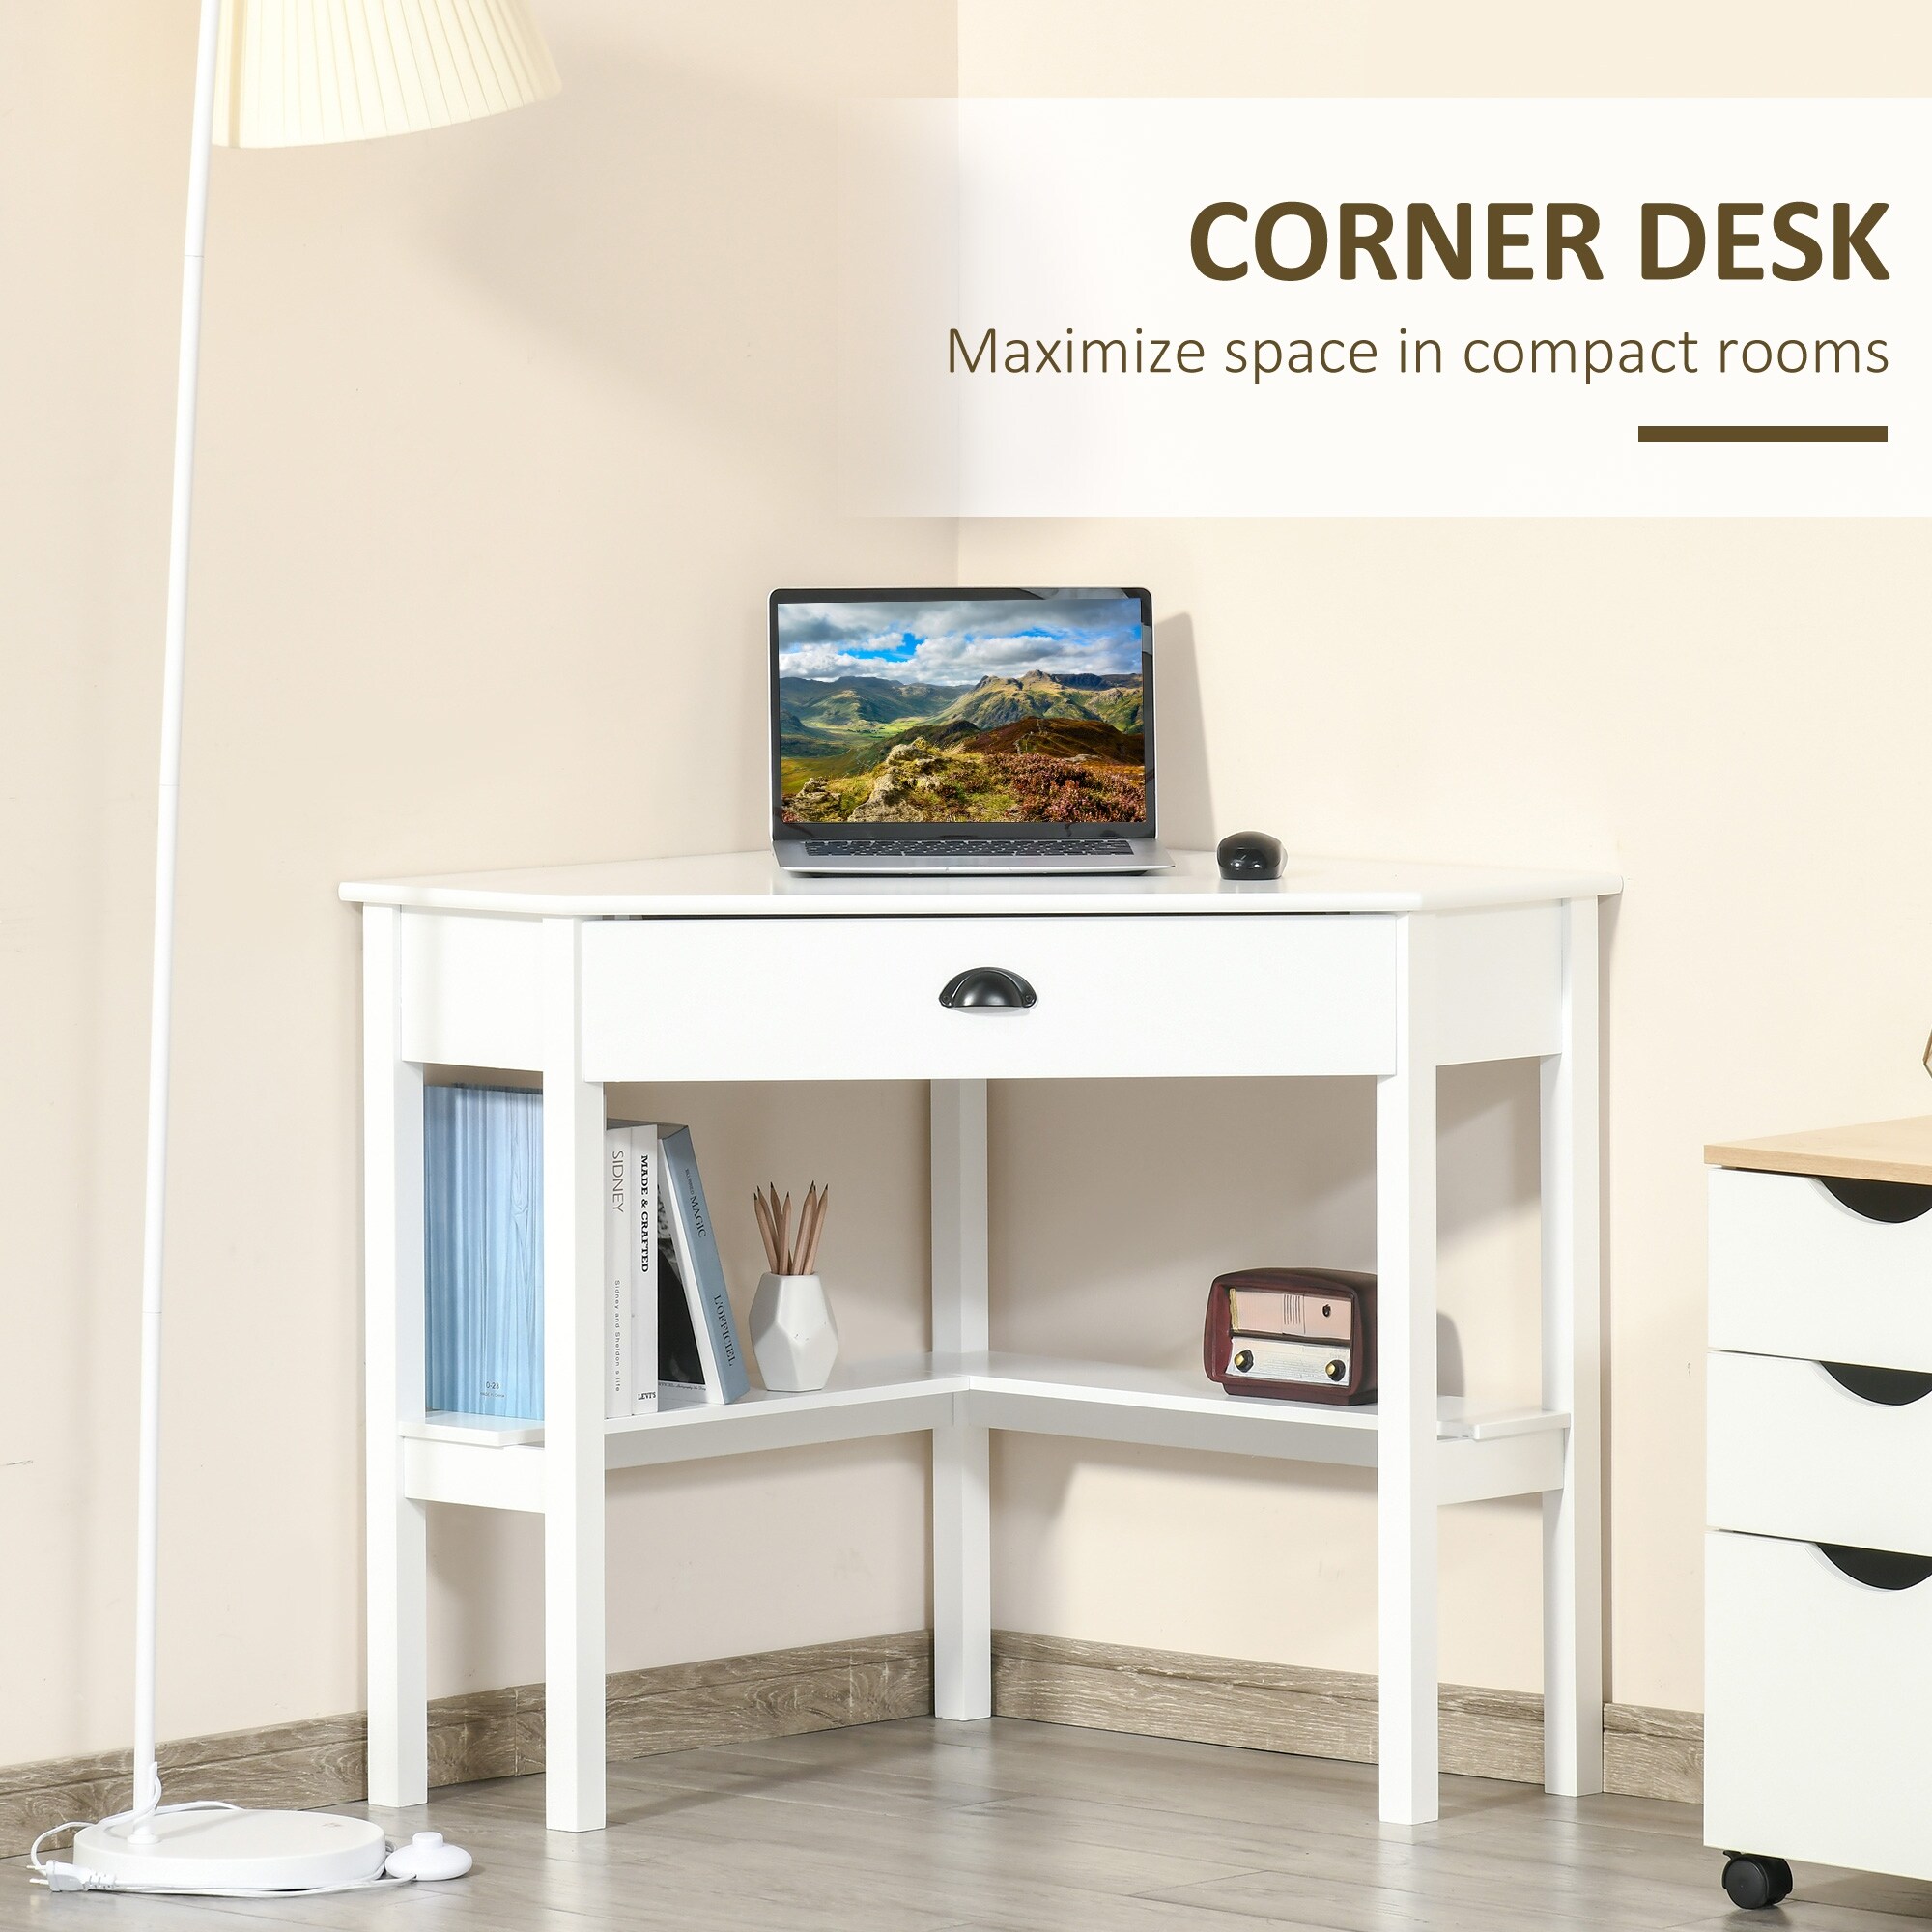 https://ak1.ostkcdn.com/images/products/is/images/direct/7297a302b83f3372abe2dd8fed58c3bfb94d4025/HOMCOM-Corner-Desk%2C-Triangle-Computer-Desk-with-Drawer-and-Storage-Shelves-for-Small-Space.jpg